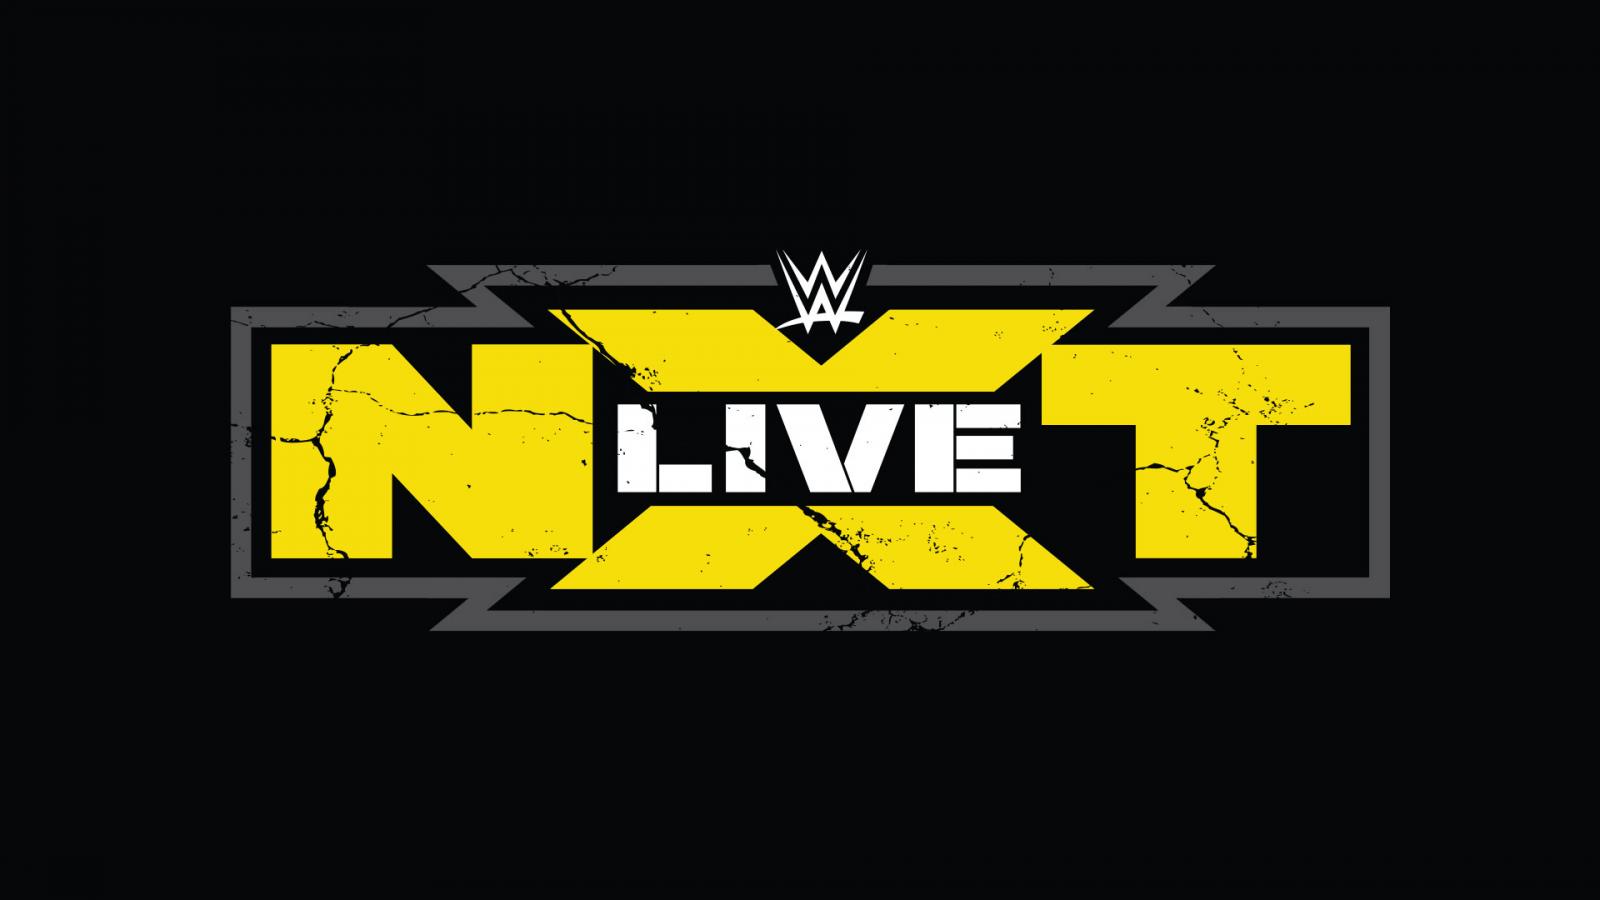 WWE NXT Live! comes to RVA for the first time ever